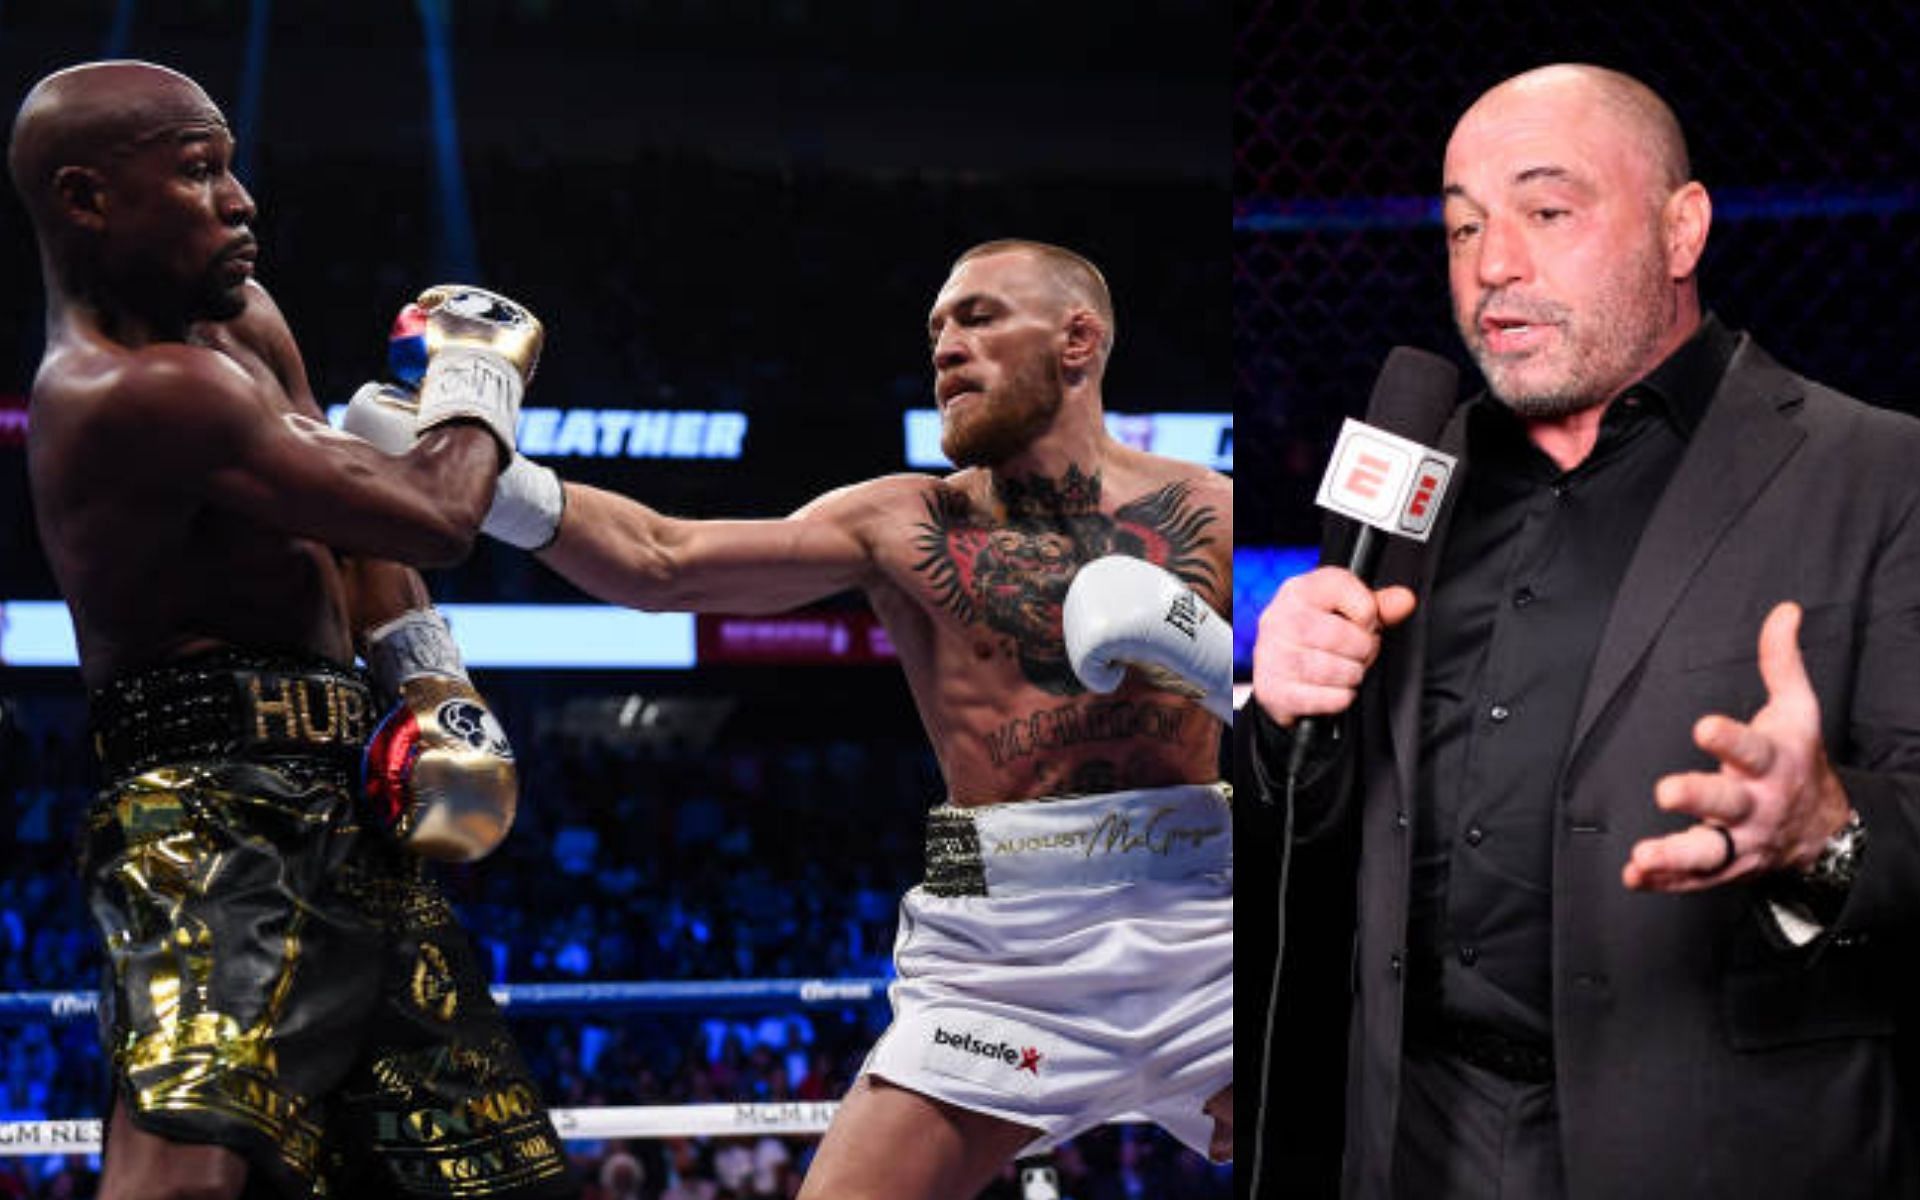 Why did Conor McGregor lose to Floyd Mayweather? Joe Rogan answers